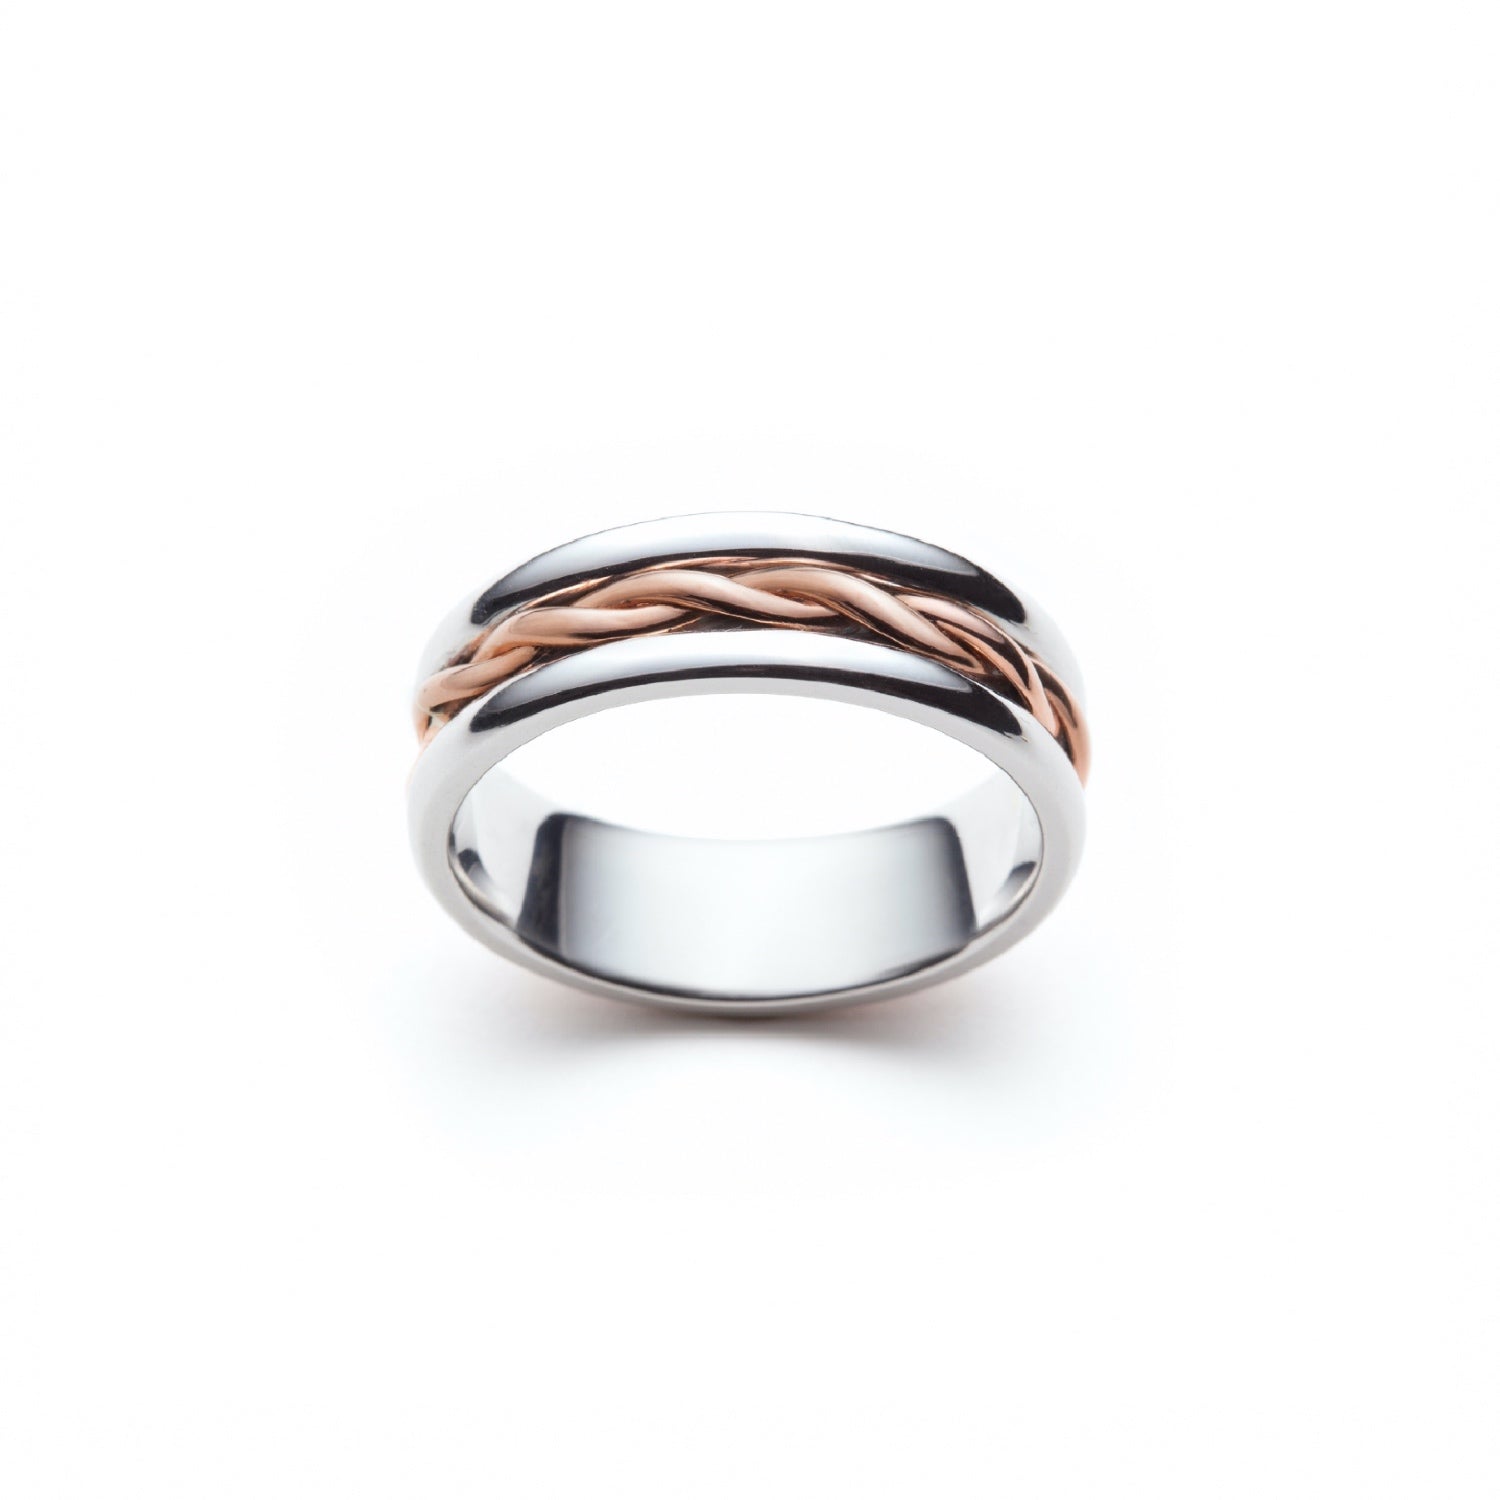 Signature Twist Polished Finish 6-7 mm Mixed Metal Wedding Band in Rose and White Gold